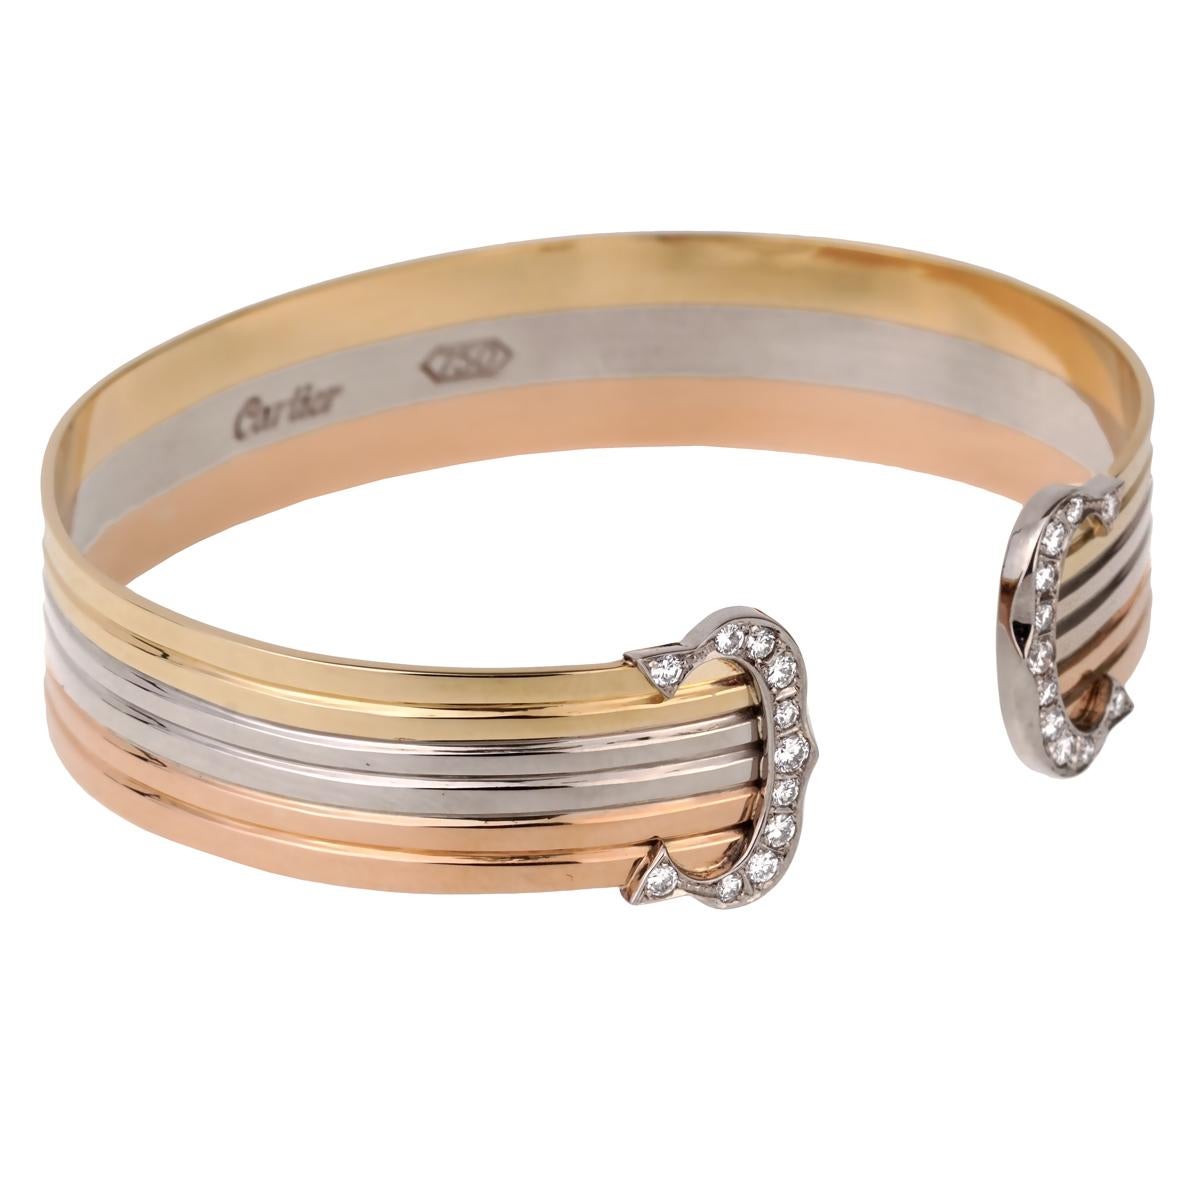 A chic Cartier bracelet from the C de Cartier collection featuring white yellow and rose gold complemented with round brilliant cut diamonds on the iconic Cartier C motifs

Bracelet Length: Upto 7